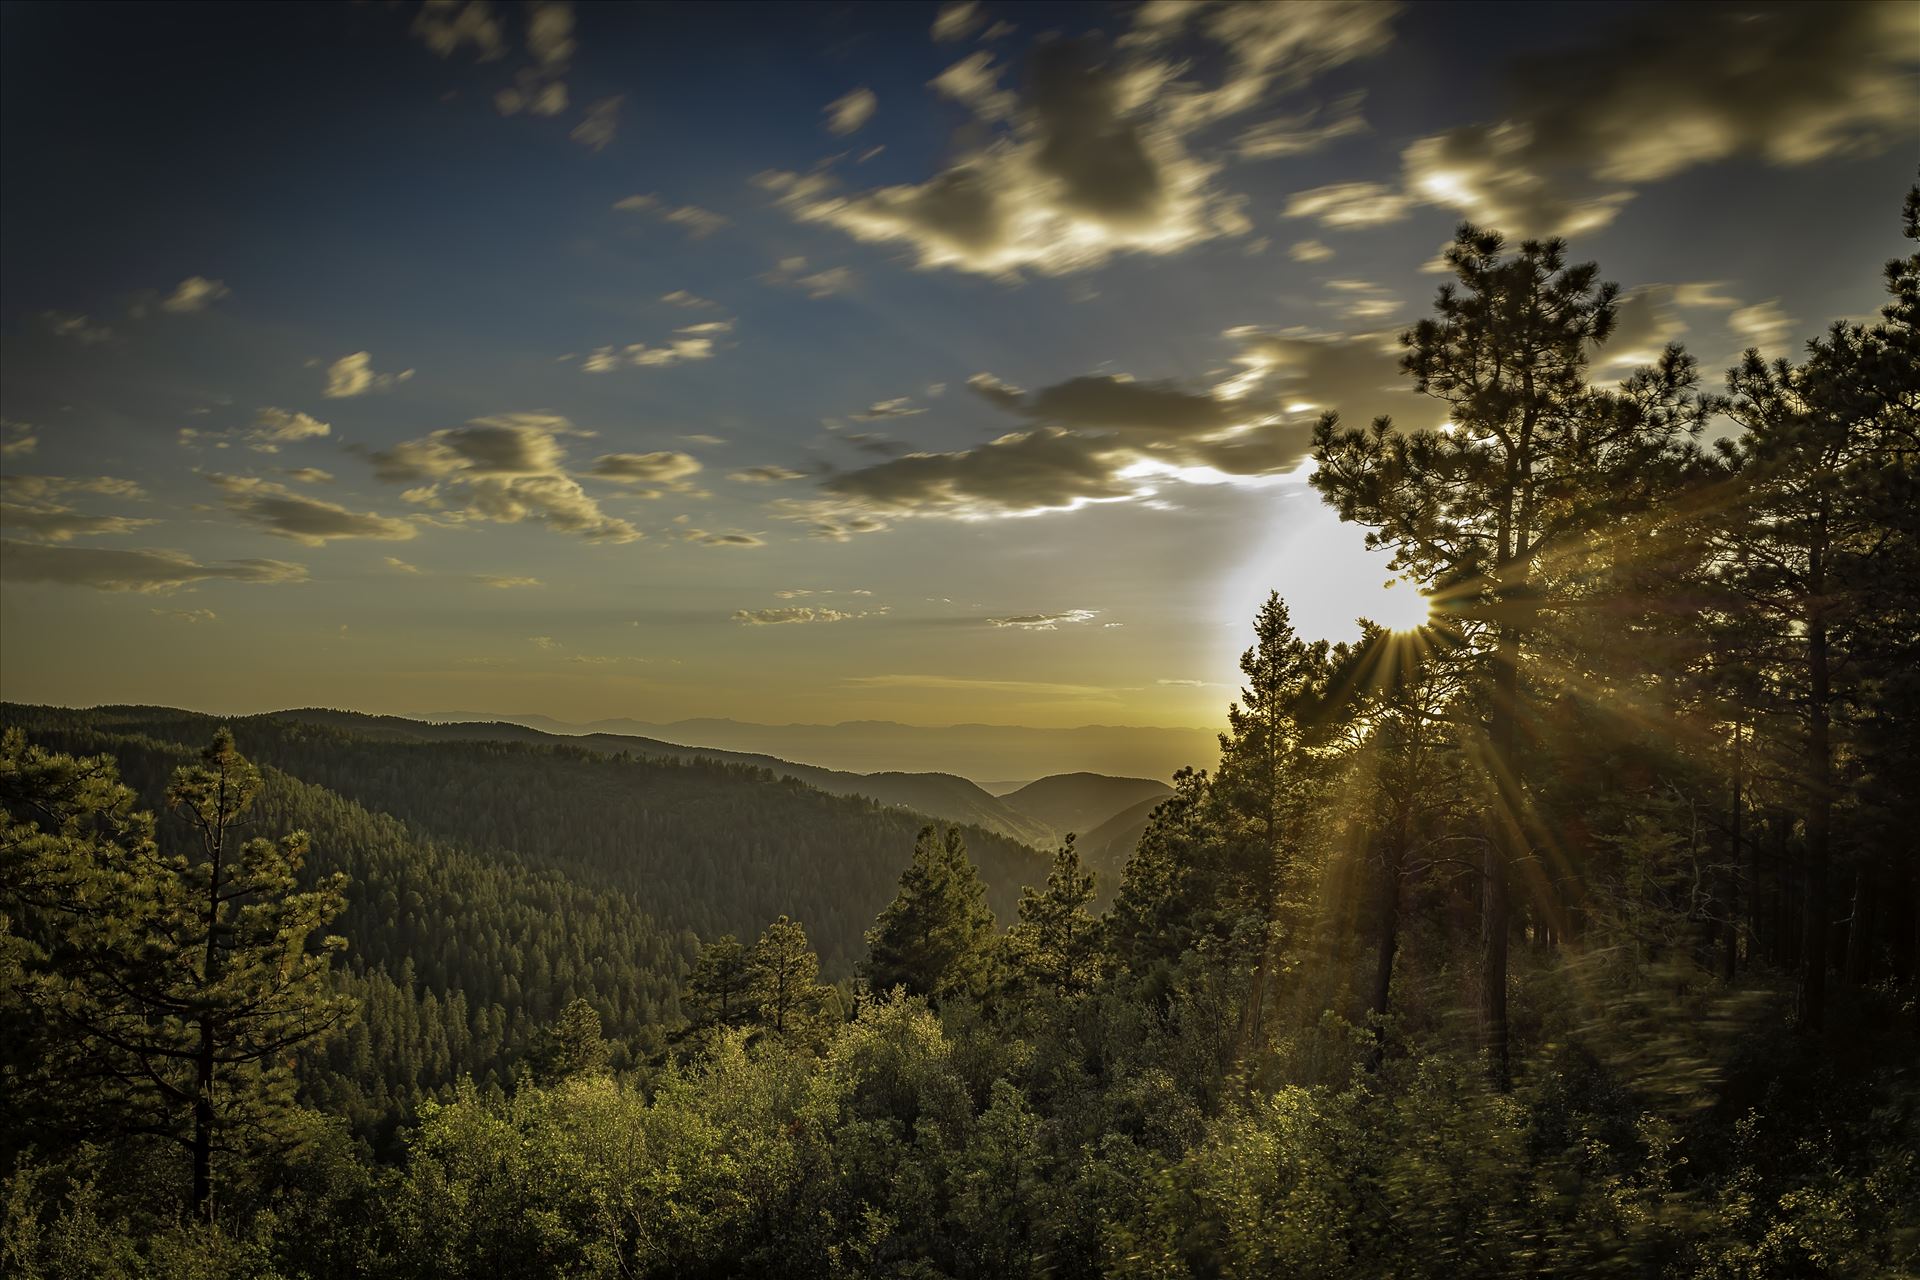 sunsetting in the cloudcroft NM mountains 8500933.jpg Sunsetting in the mountains of cloudcroft New Mexico. Photograph taken from upper lookout in Lincoln National Forest by Terry Kelly Photography